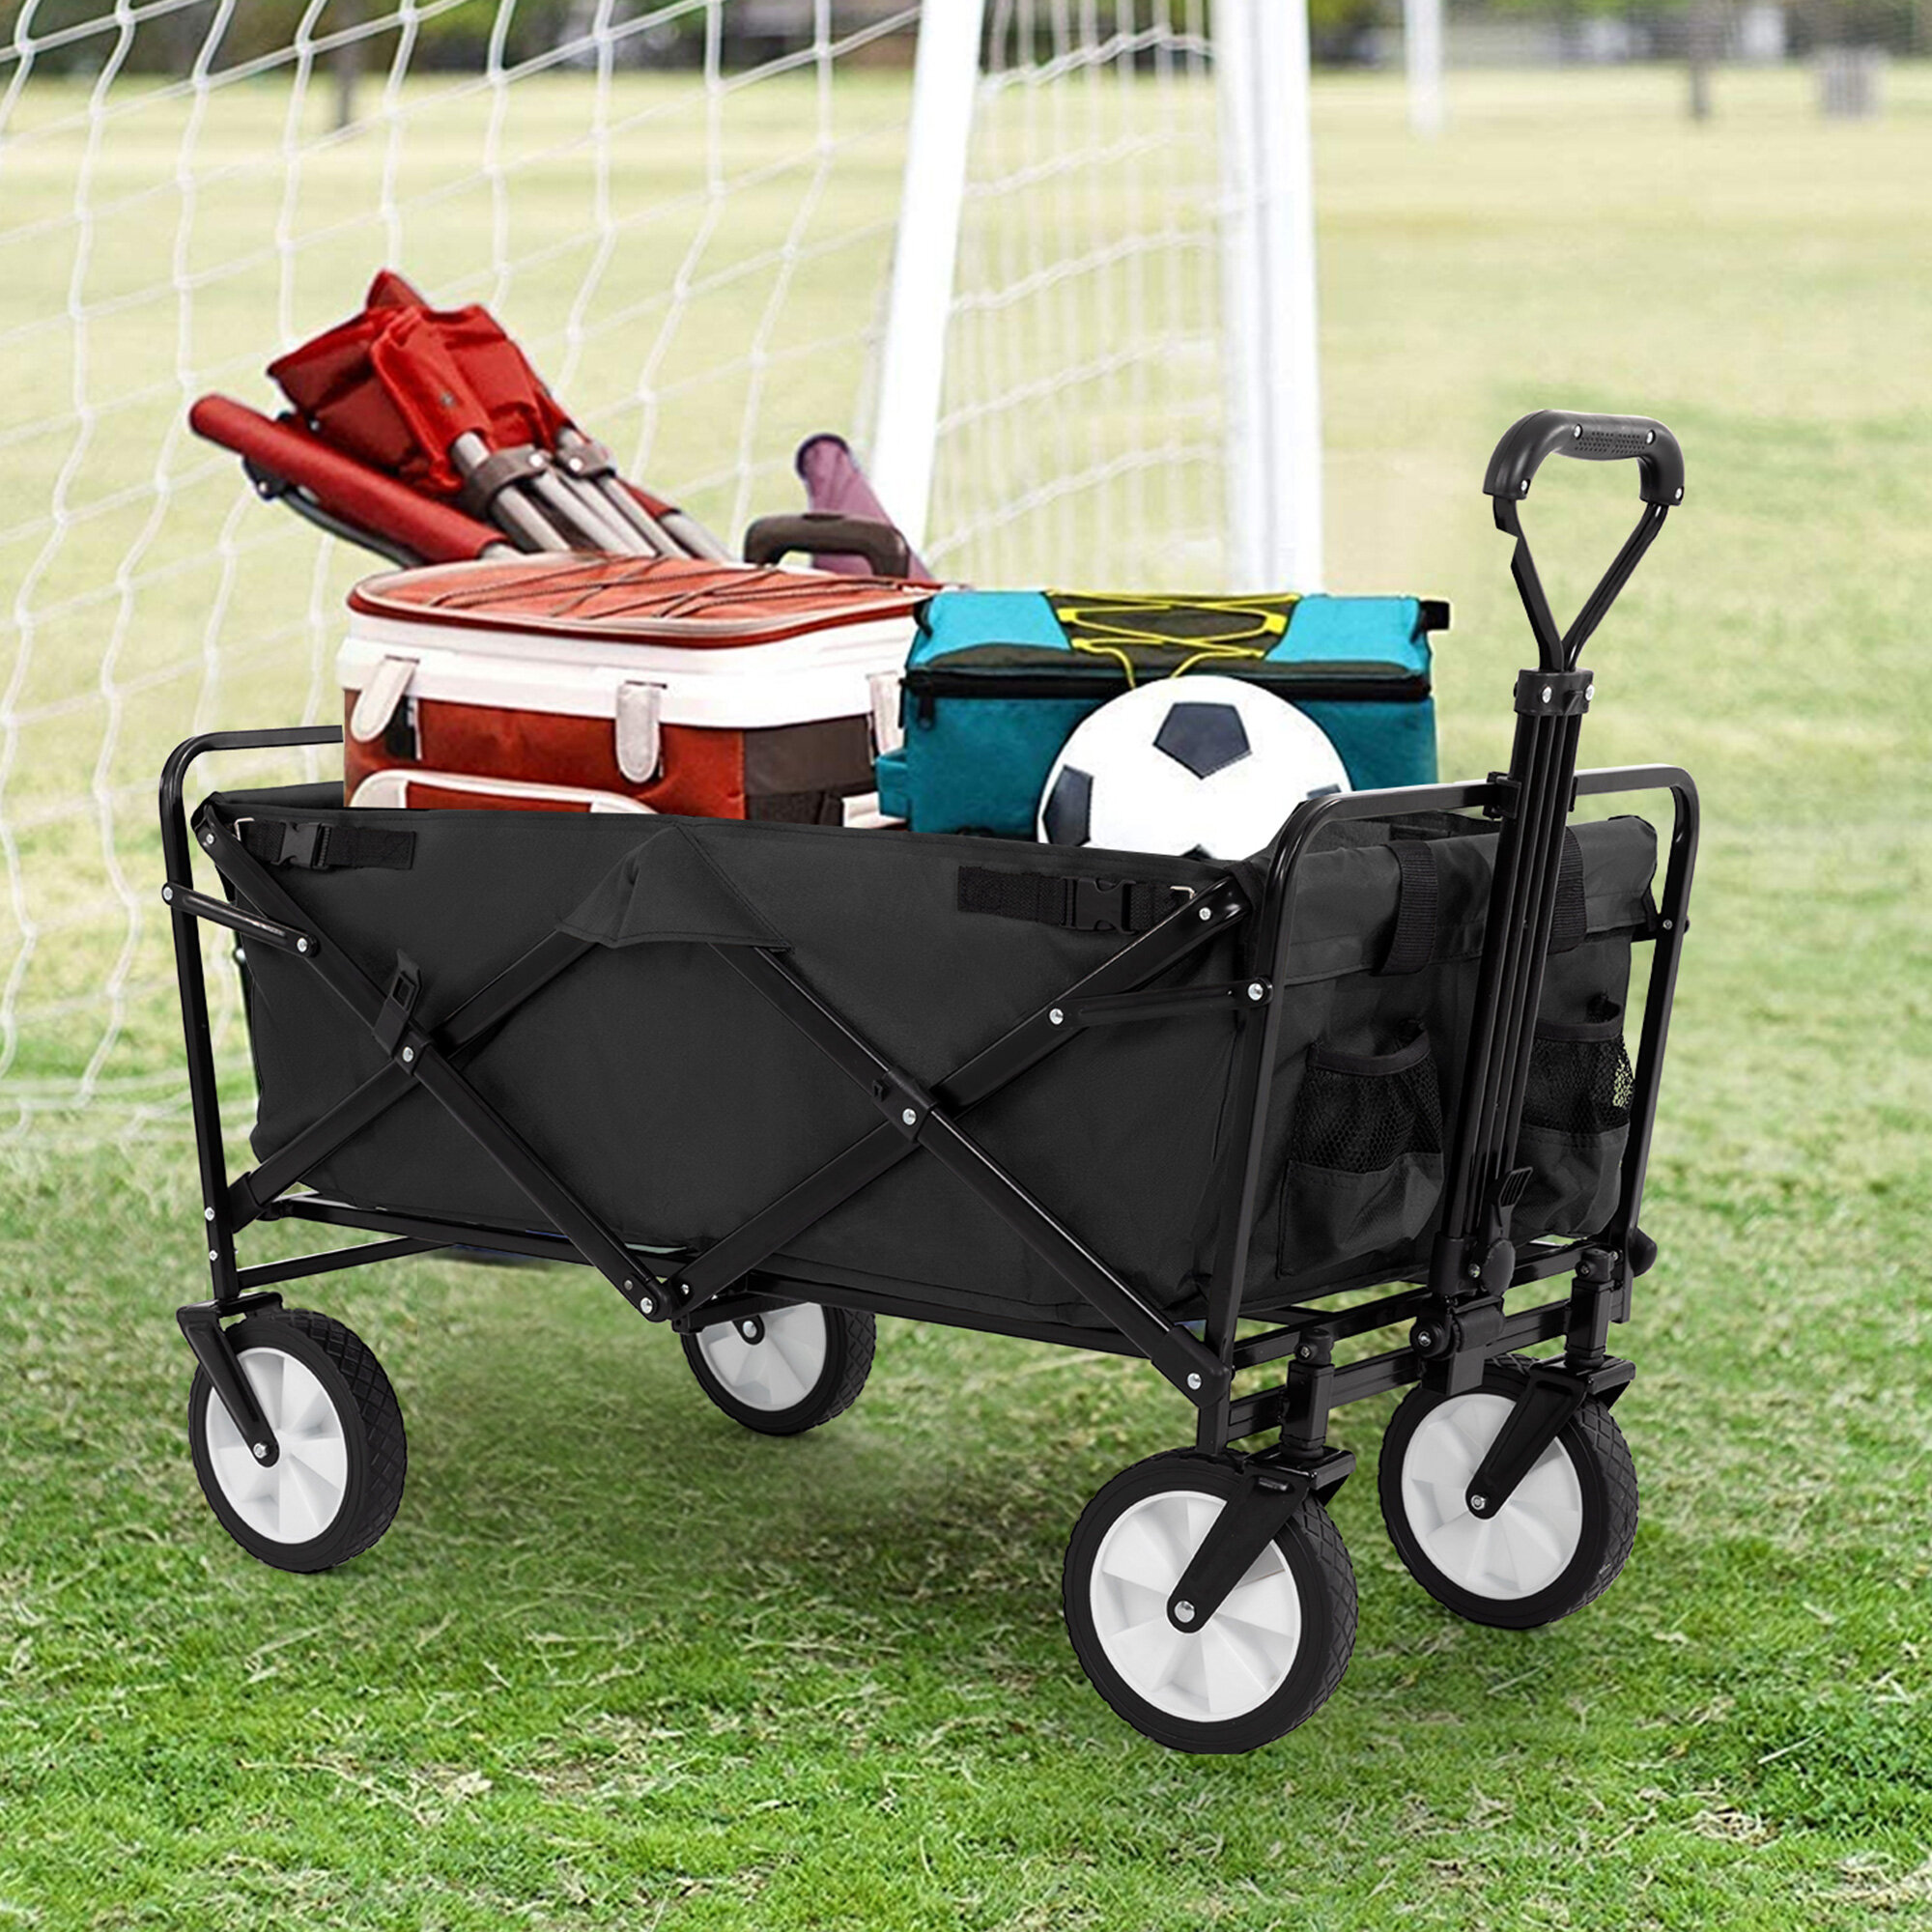 GOJOOASIS Collapsible Beach Wagon Folding Cart with Wide Wheels for Shopping Black and Green Camping Sports 